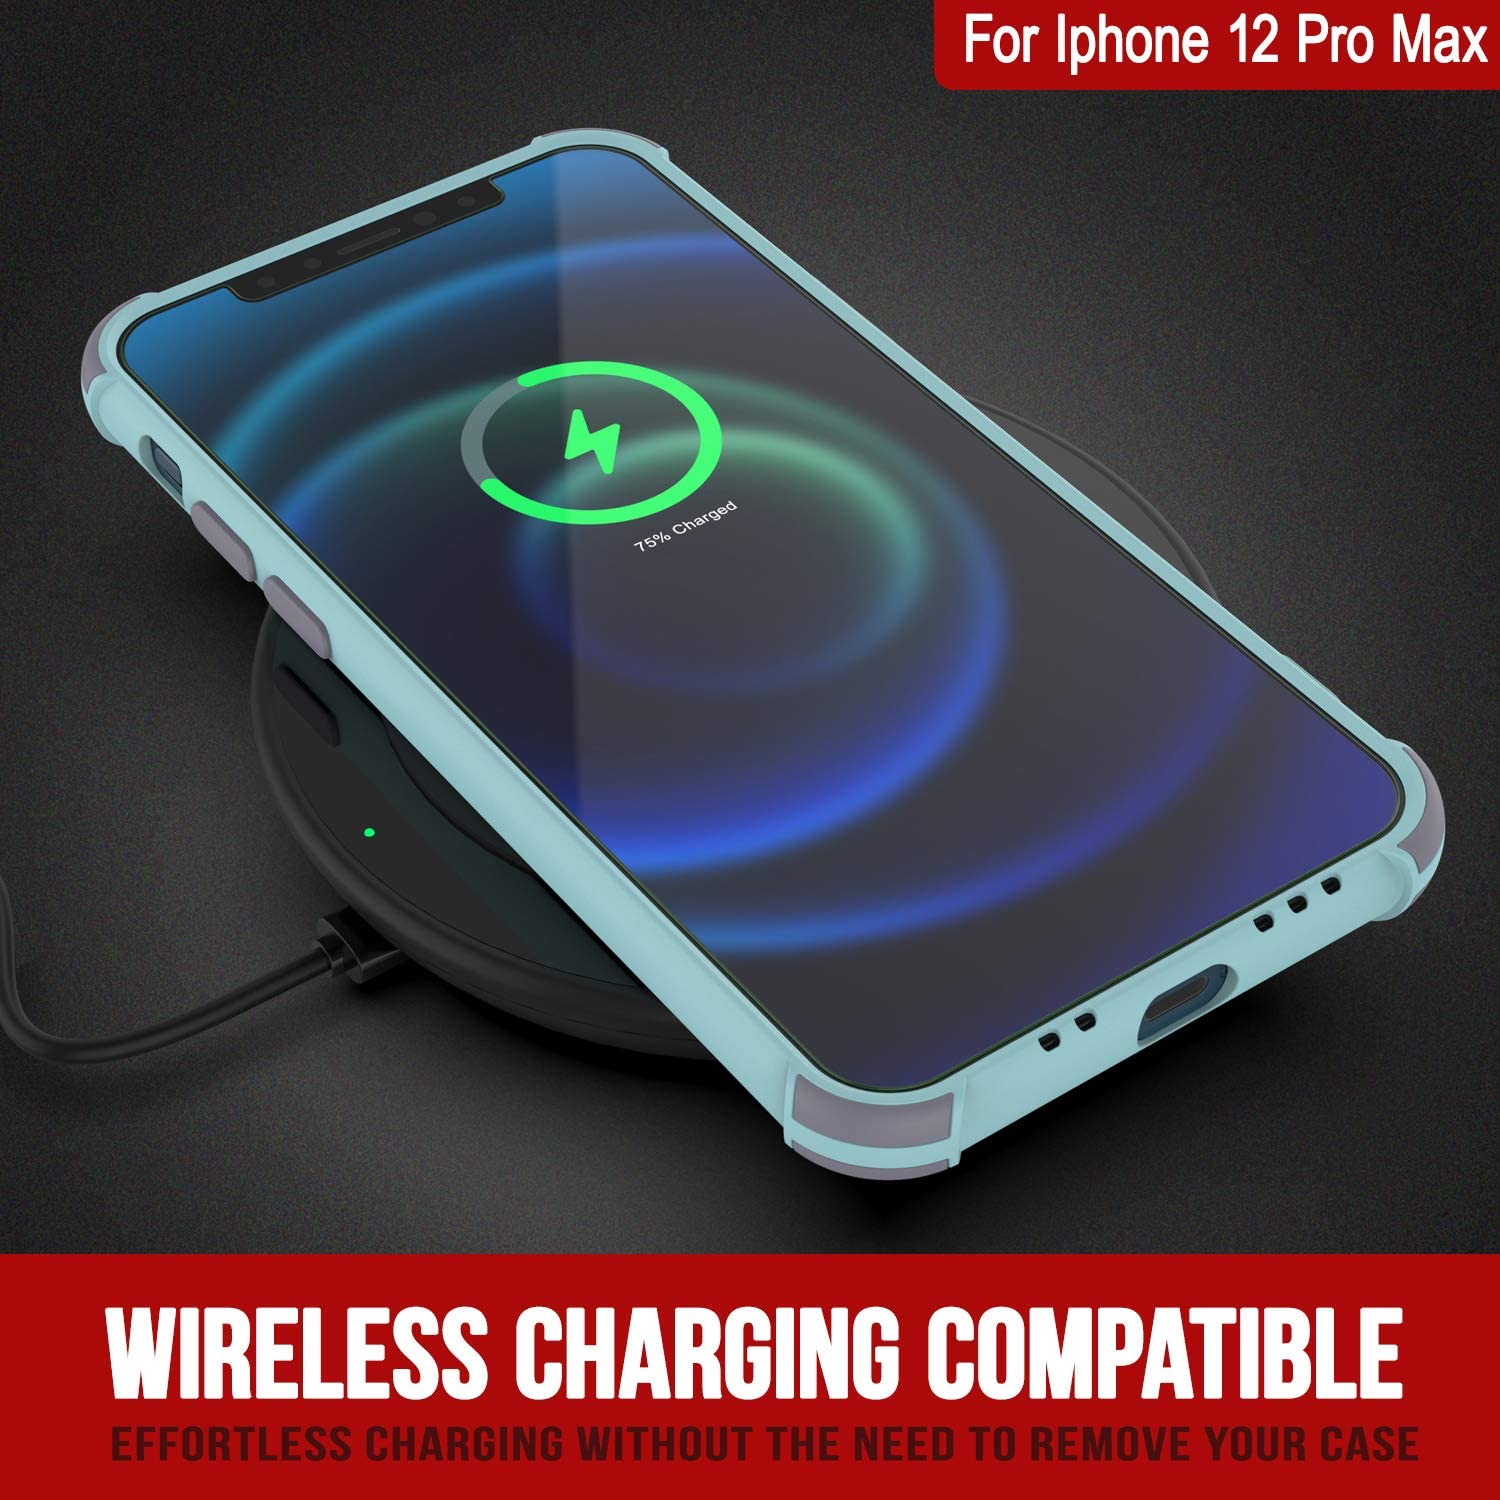 Punkcase Protective & Lightweight TPU Case [Sunshine Series] for iPhone 12 Pro Max [Teal]